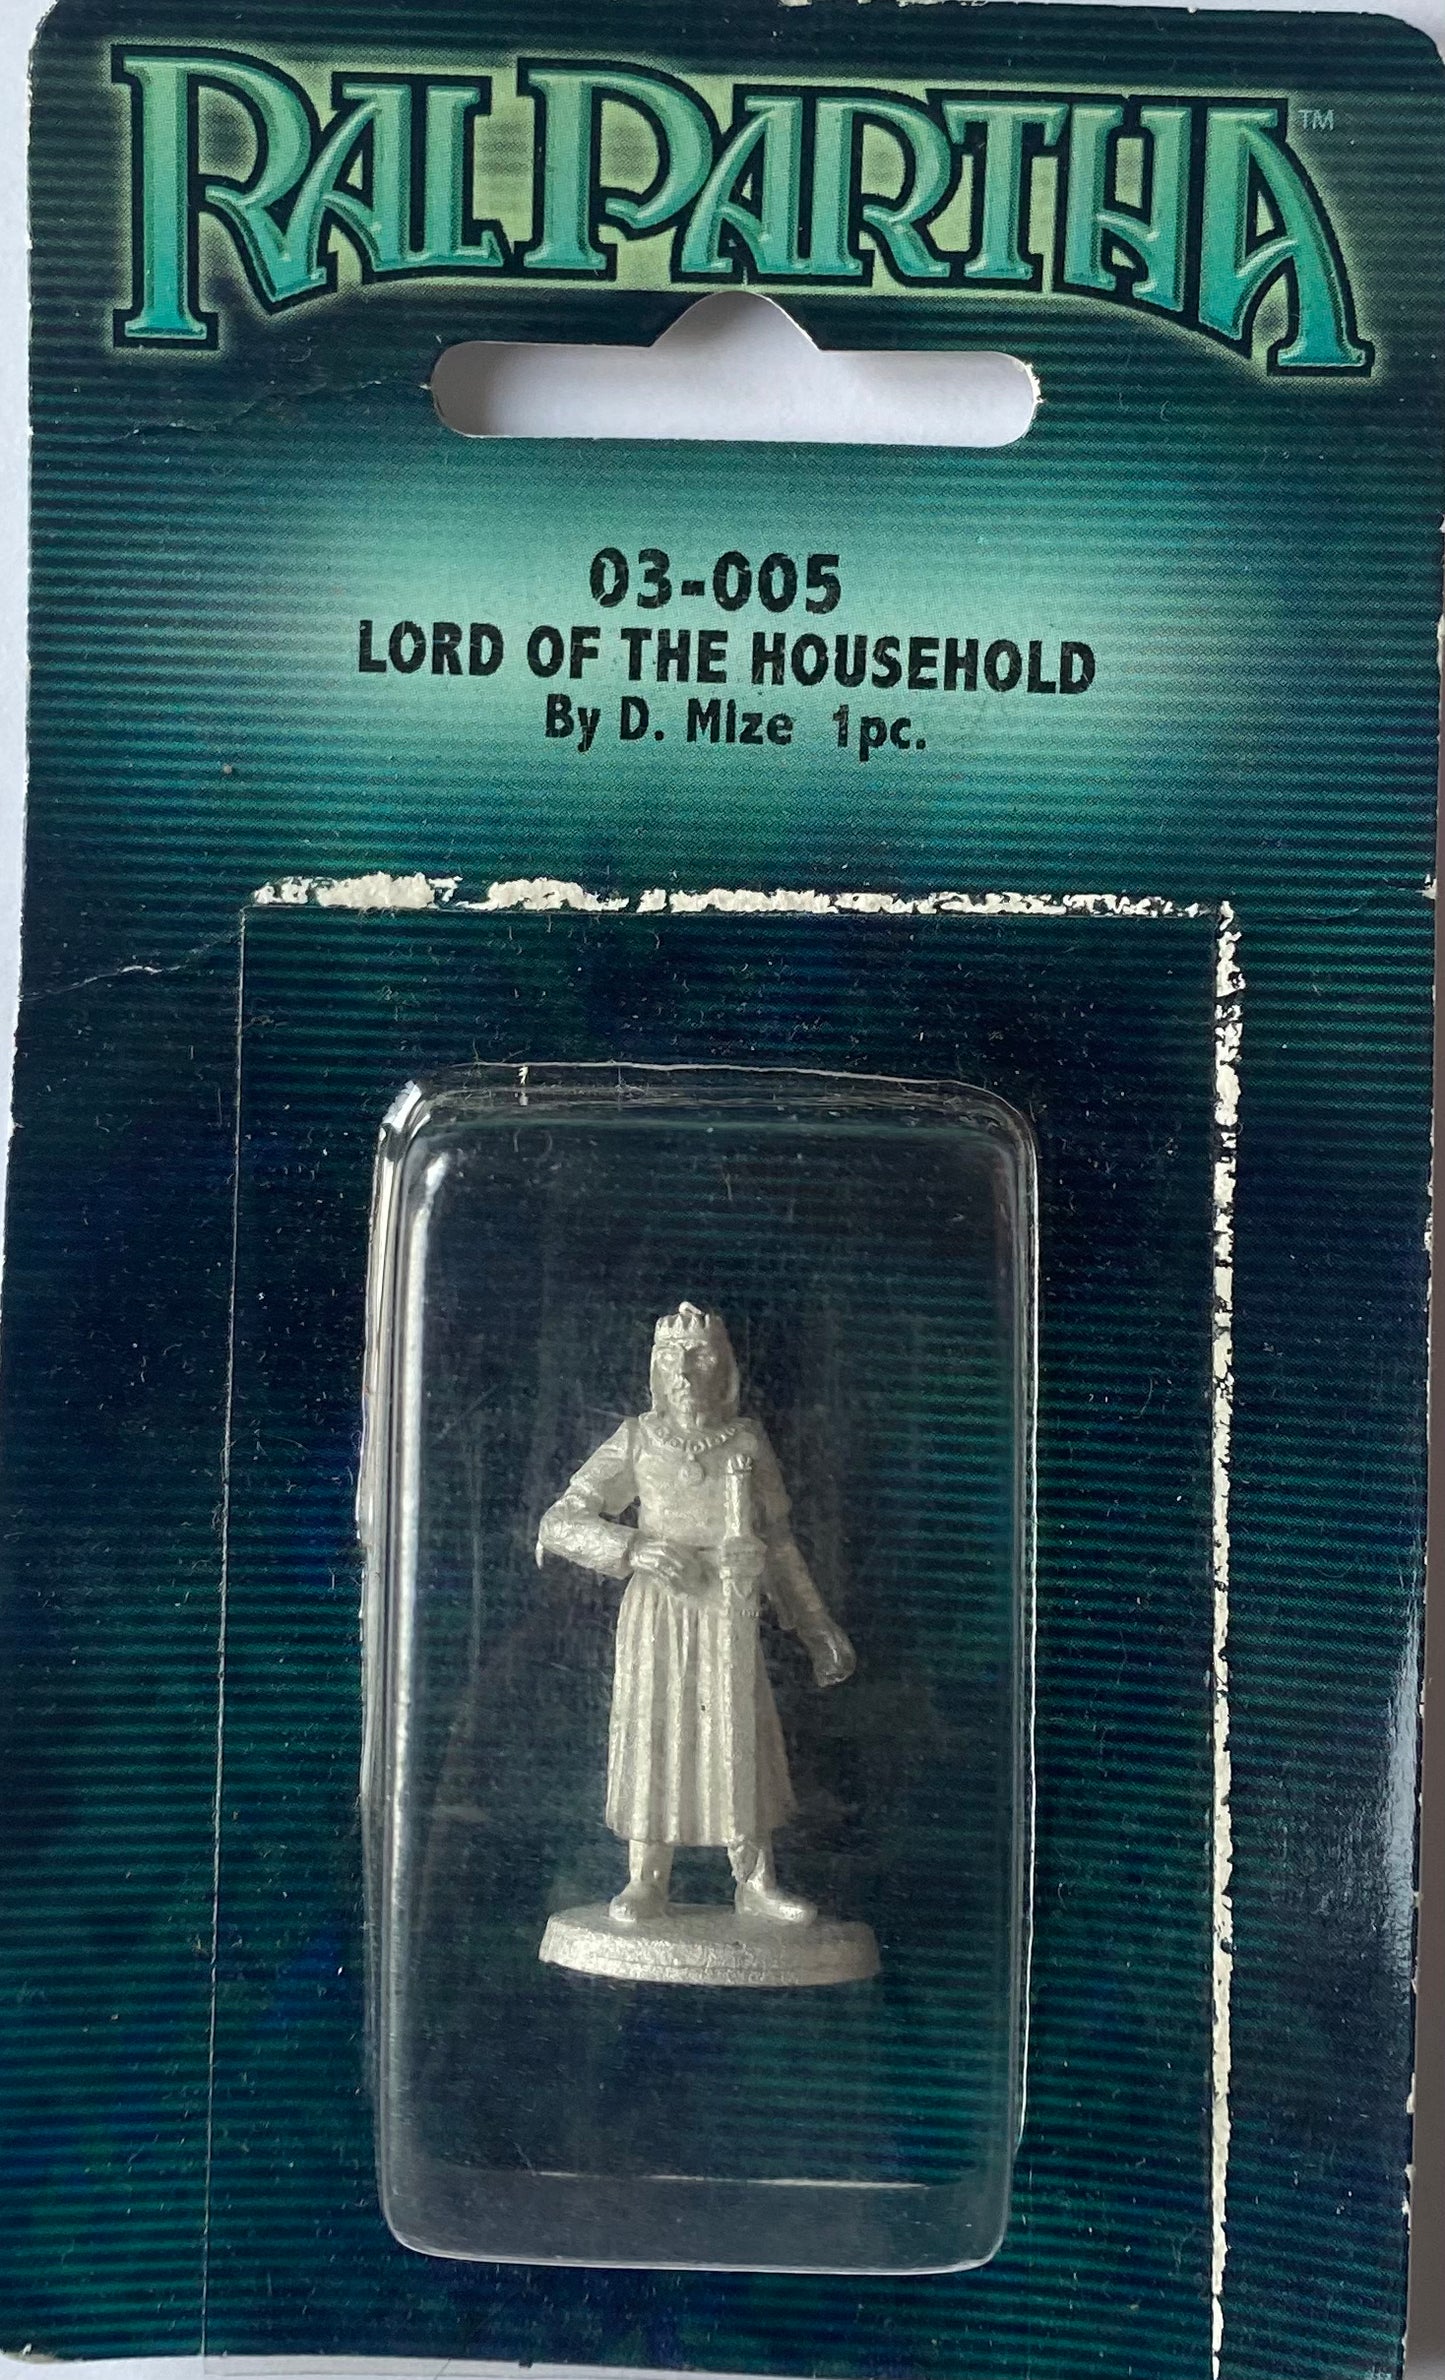 Ral Partha 03-005 Lord of the household